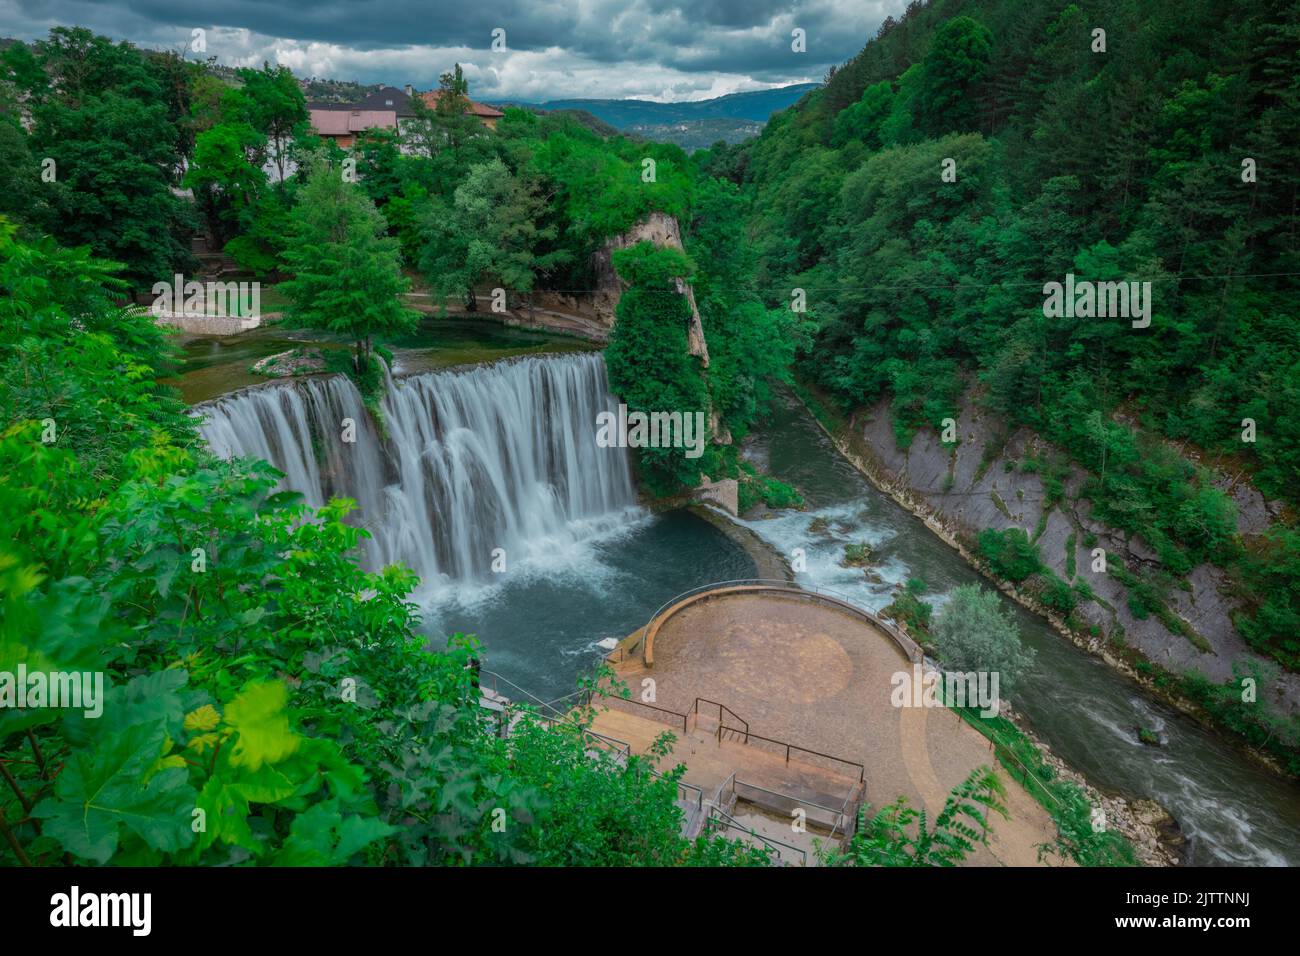 Long exposure panorama of Pliva river waterfalls at Jajce, bosnia and hercegovina. Spectators looking at the waterfalls on a cloudy day. Stock Photo